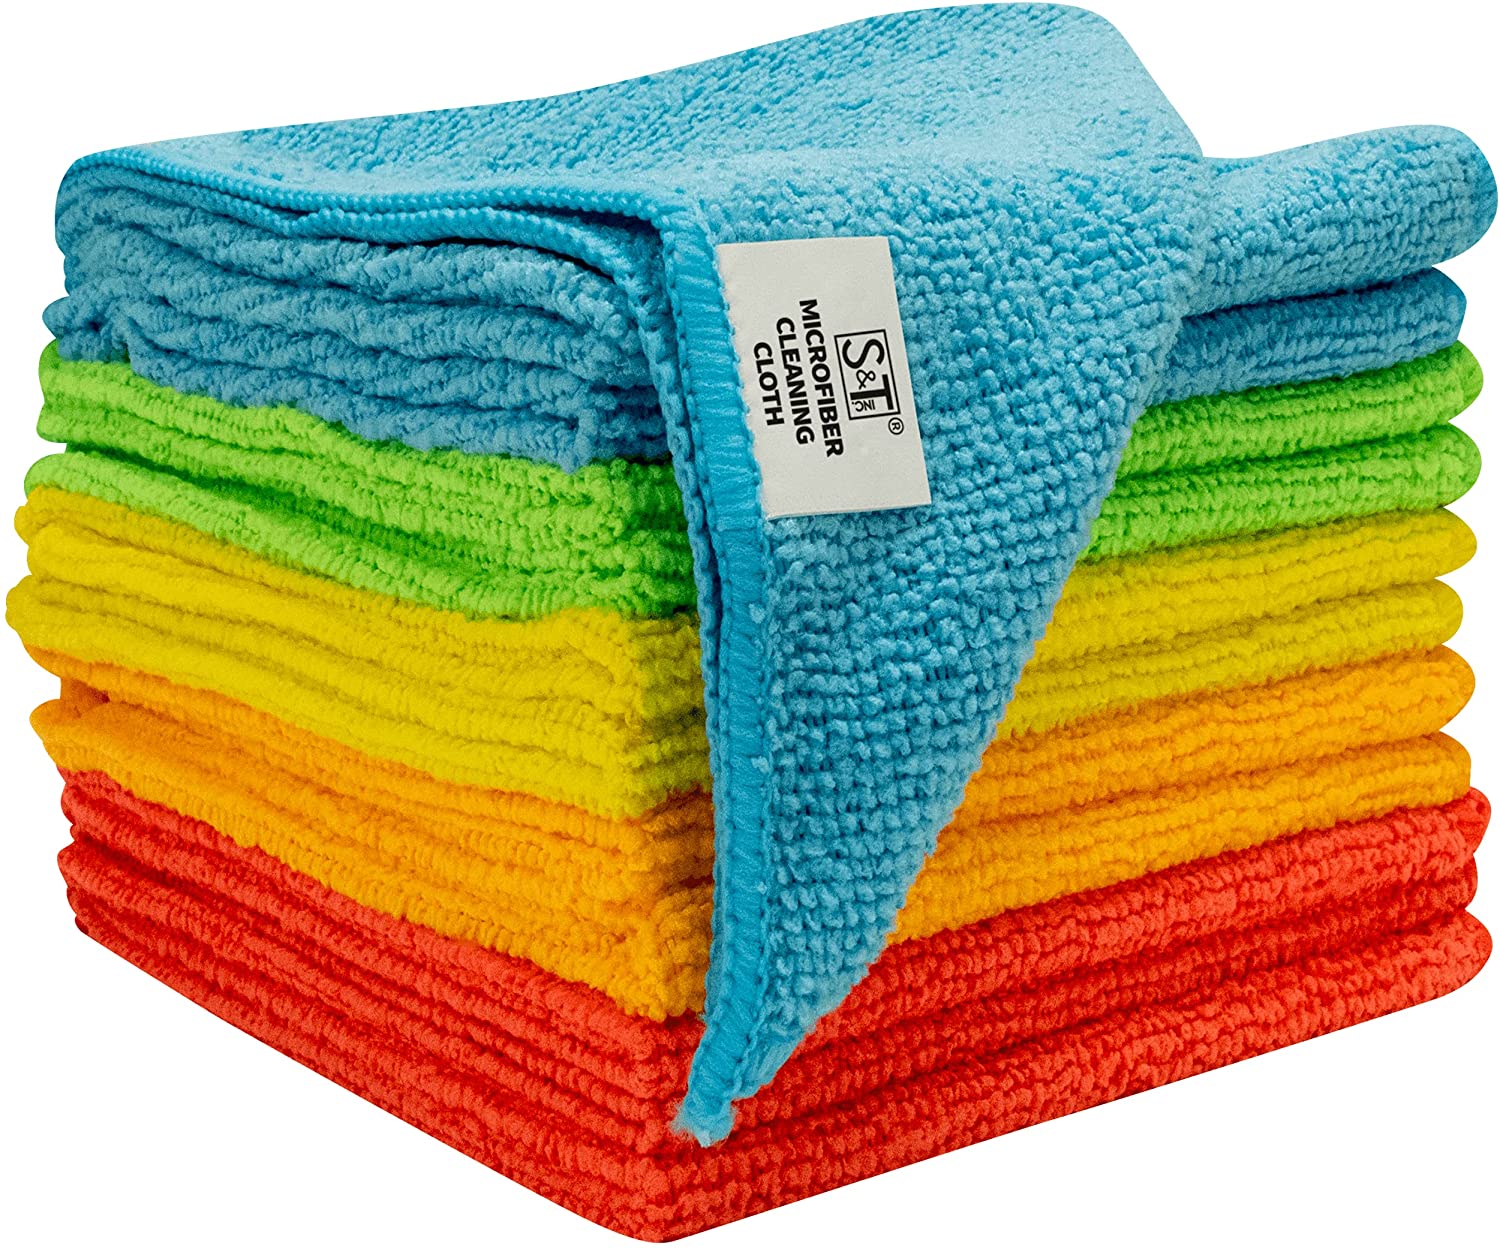 Microfiber Cleaning Clothes Reusable Softer Towels Absorbent Rags Lint Free S... 